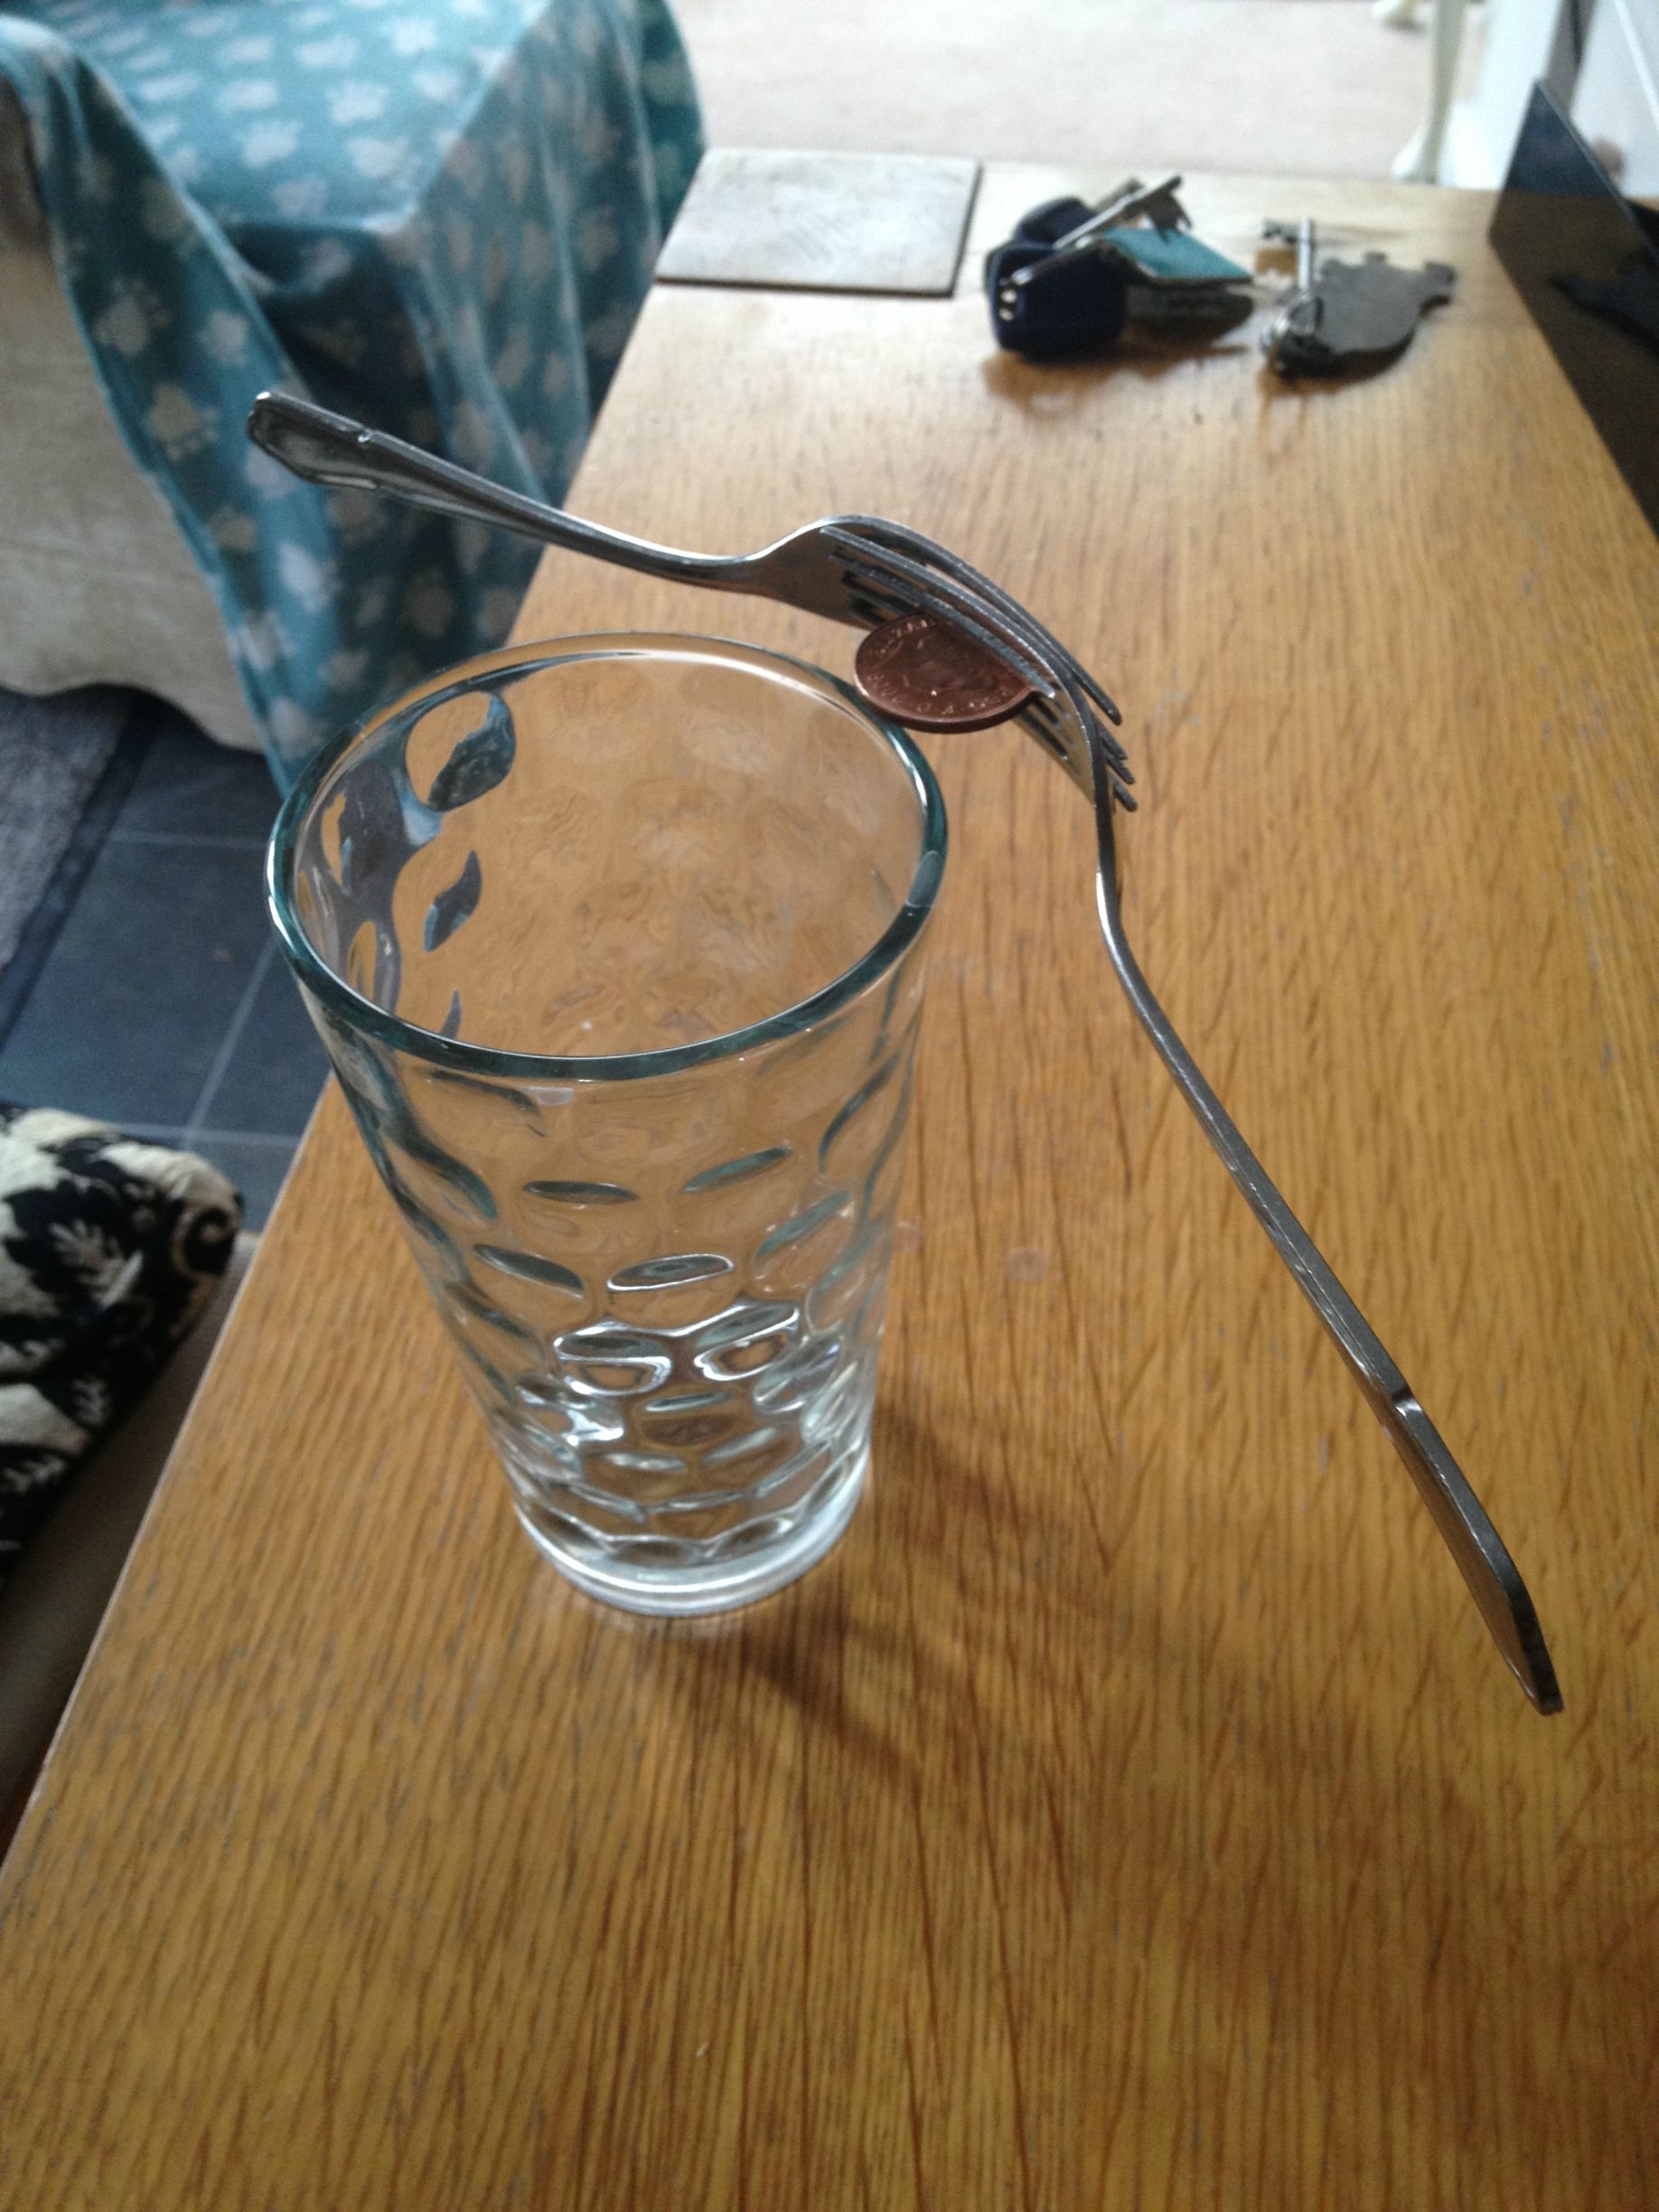 two forks and a penny balanced on a drinking glass